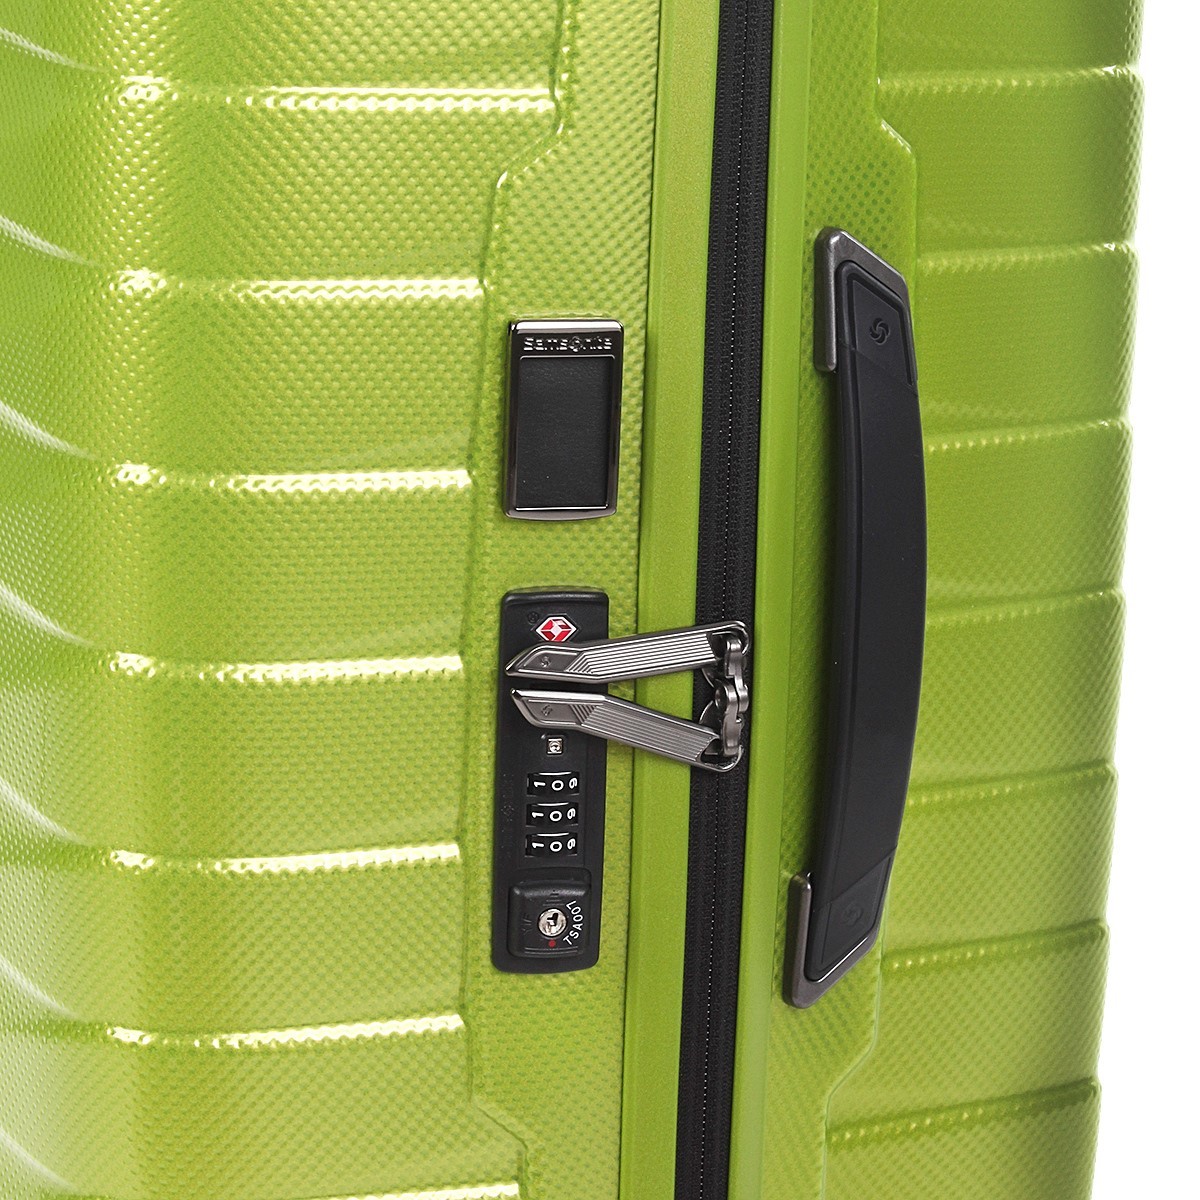 Samsonite Spinner l 4 ruote Lime Proxis CW6*74003